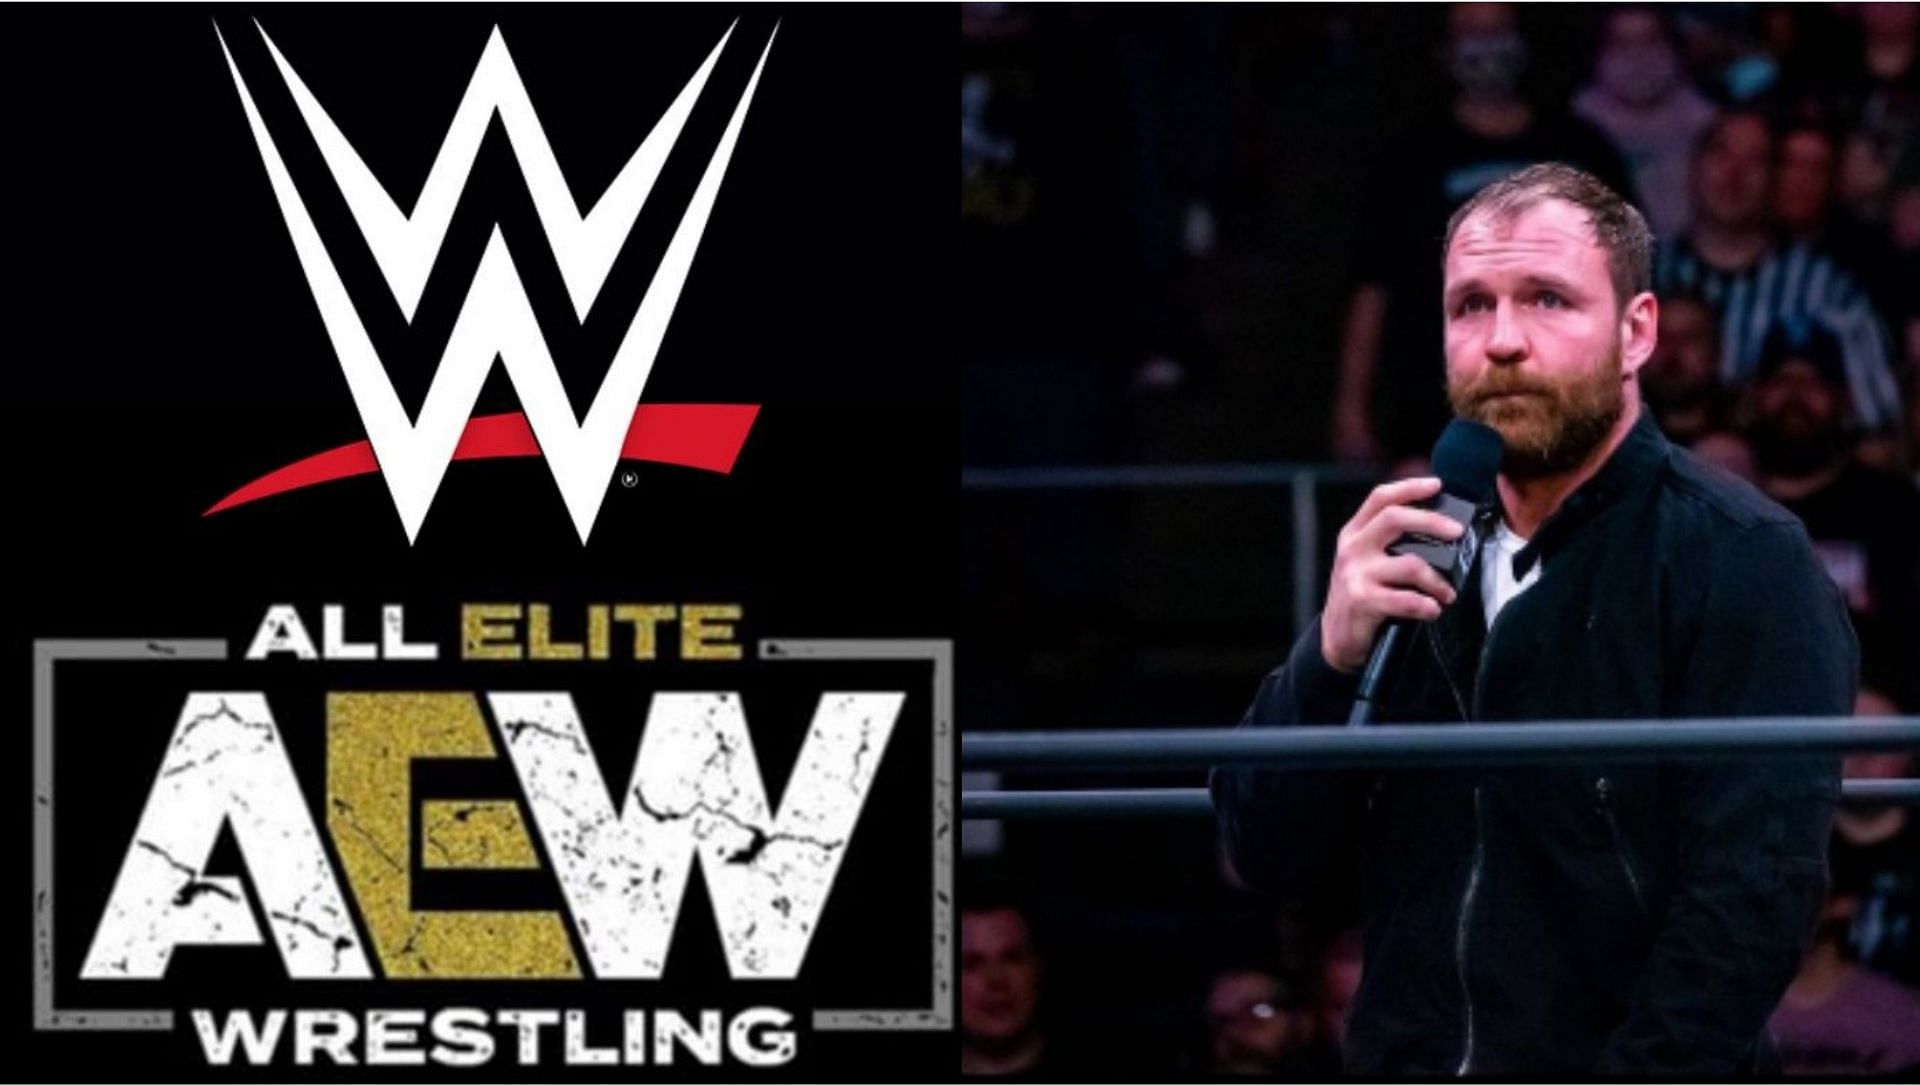 Mox is a former WWE and AEW World Champion